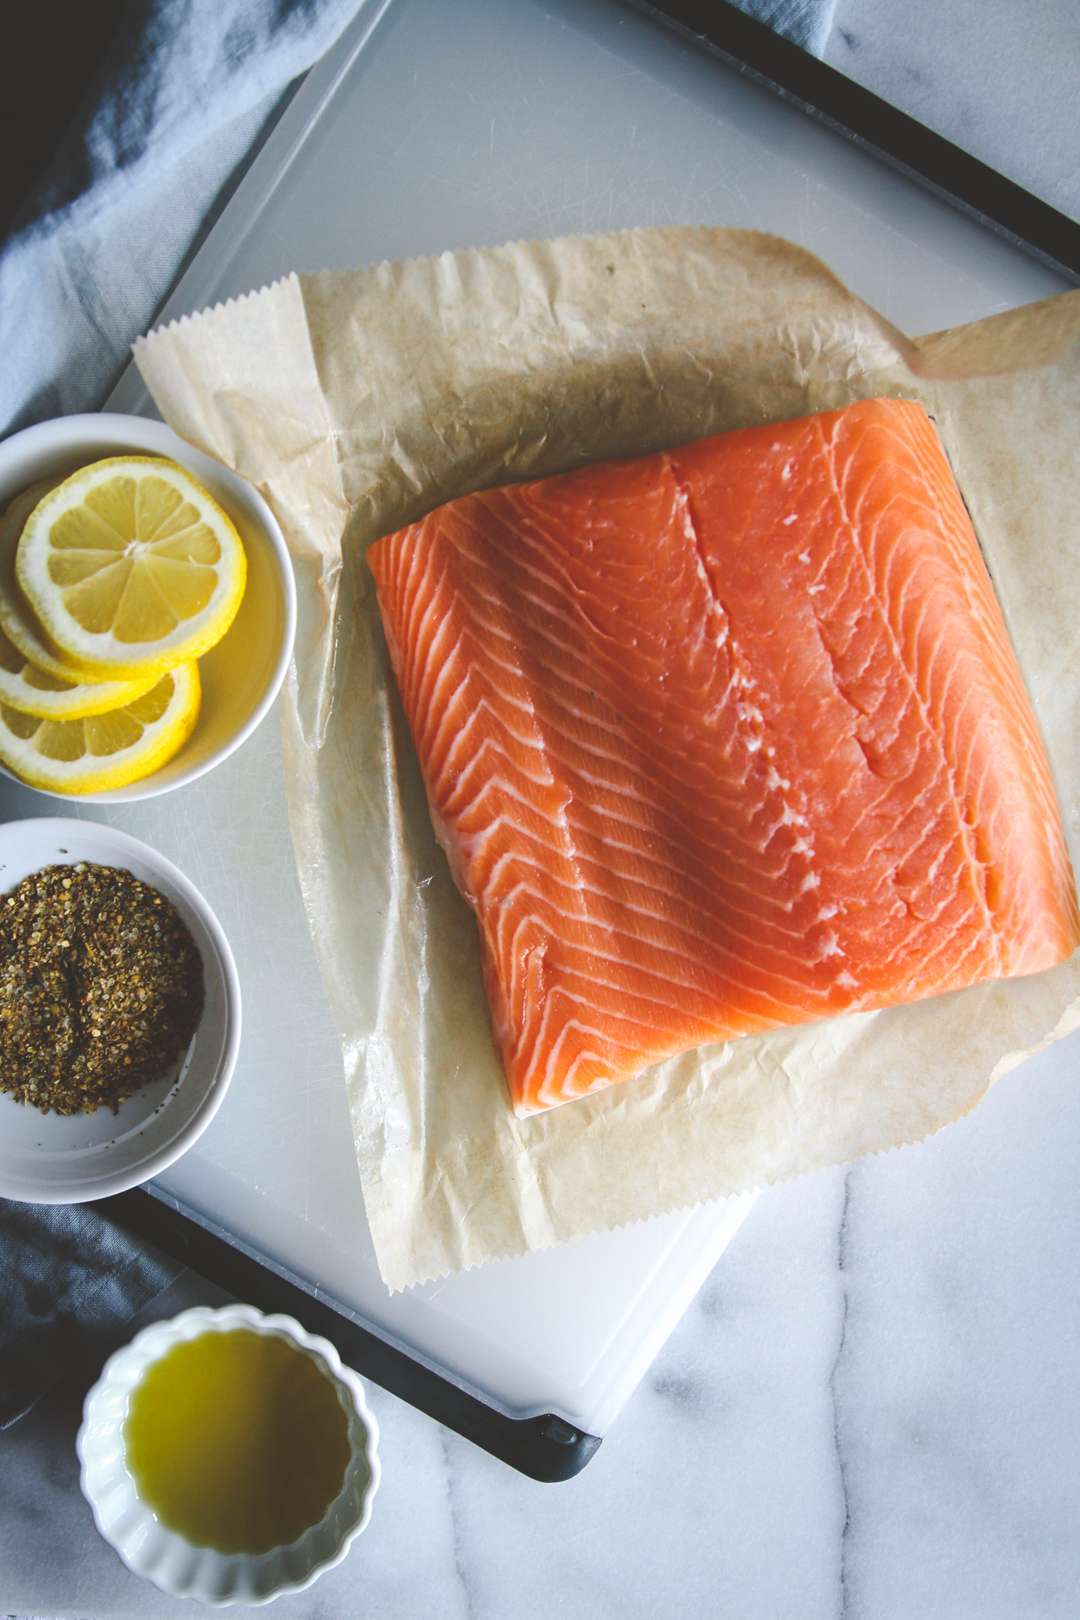 Salmon filet with lemon, spices and olive oil on the side